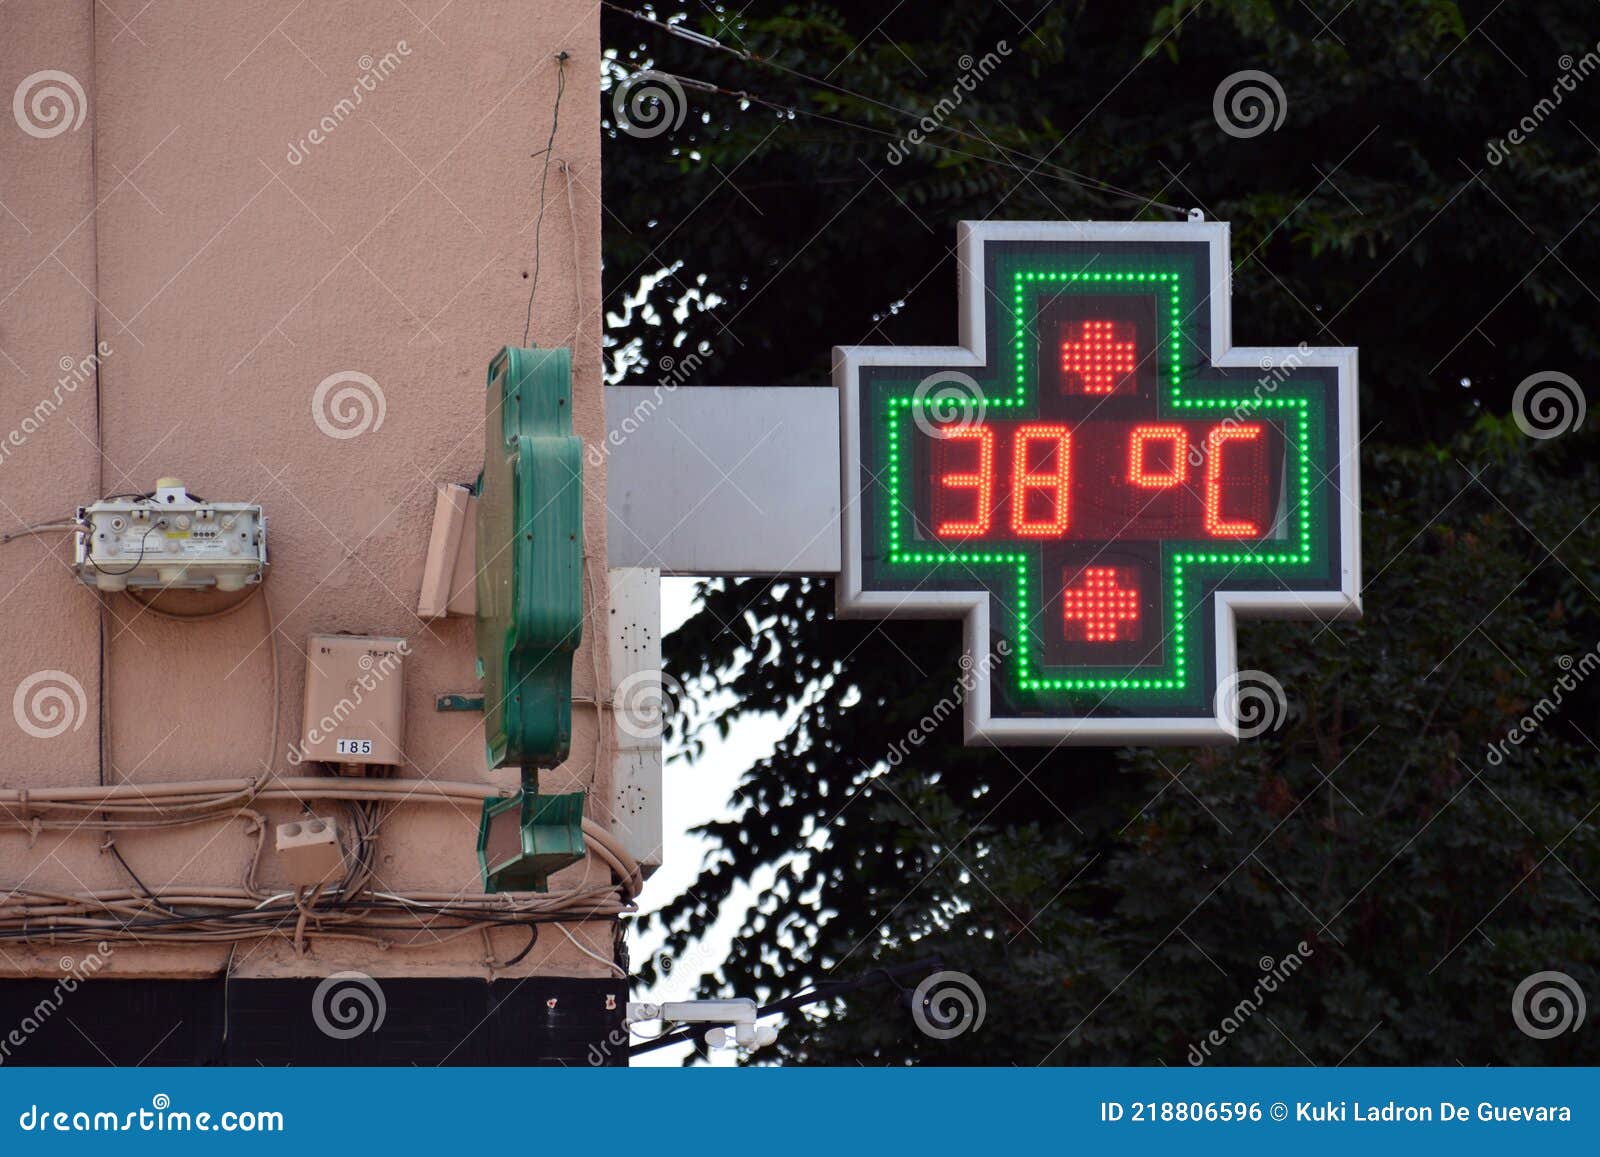 street thermometer marking 38 degrees